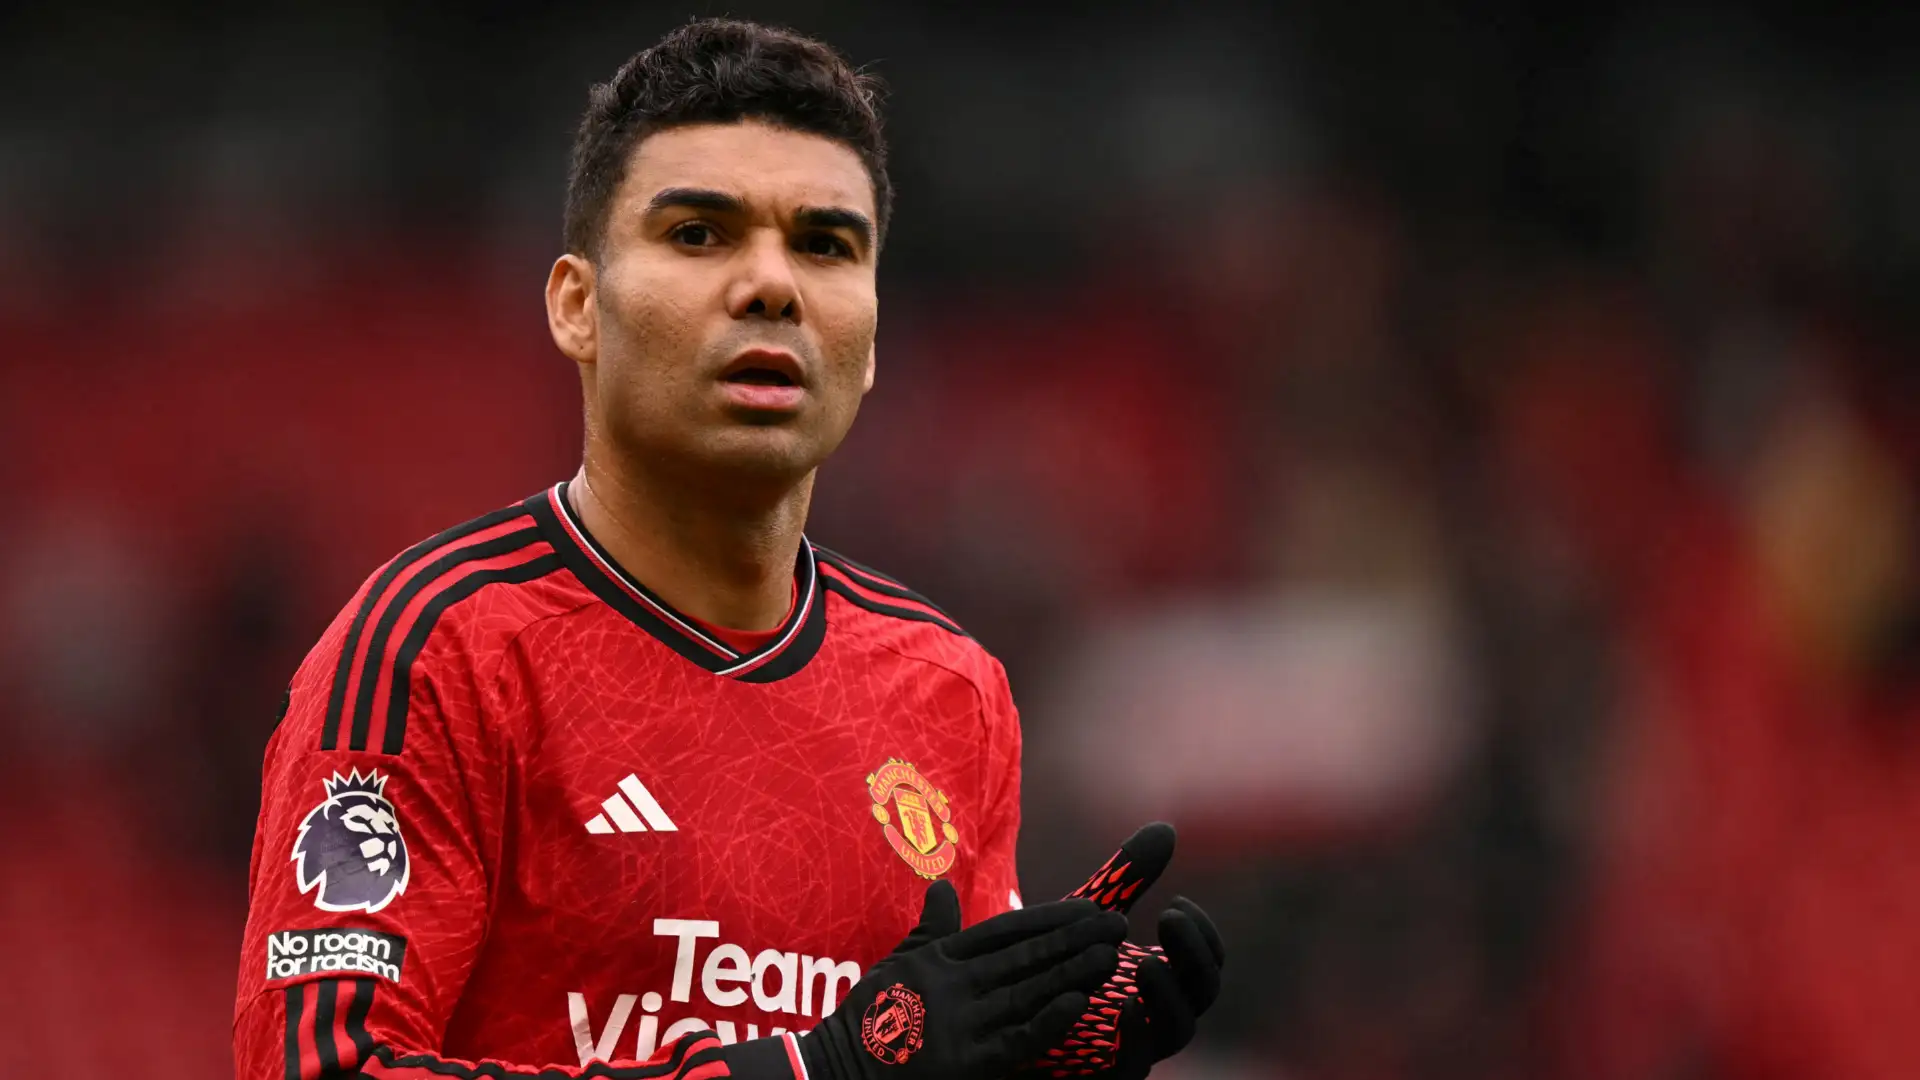 ‘Disrespectful!’ – Casemiro snaps as he delivers angry message to critics – including Jamie Carragher – who claim Man Utd midfielder should retire